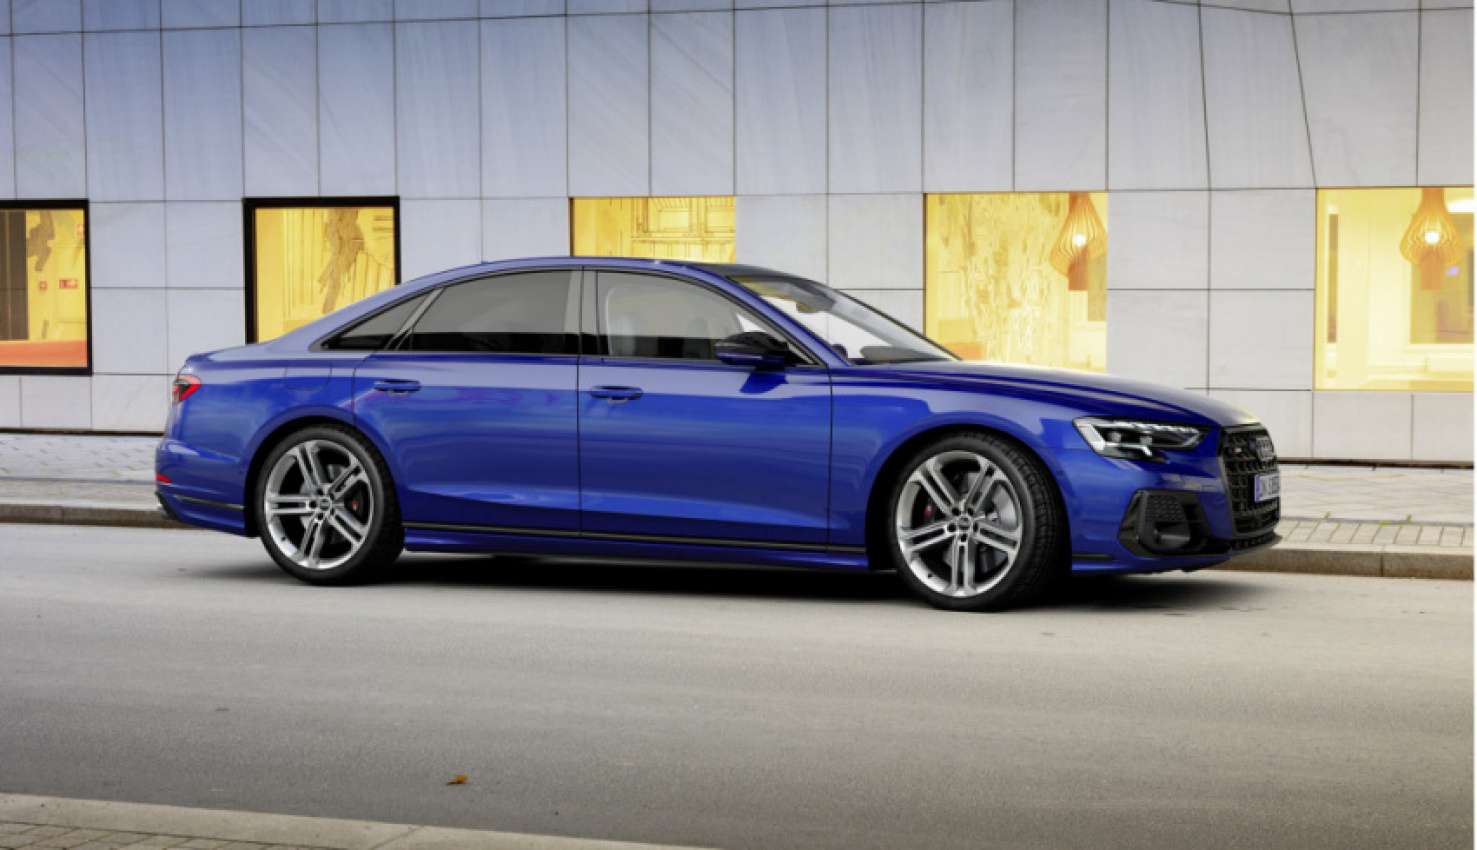 audi, autos, cars, audi a8, audi a8 news, audi news, luxury cars, sedans, videos, youtube, preview: 2022 audi a8 arrives with new styling, horch range-topper